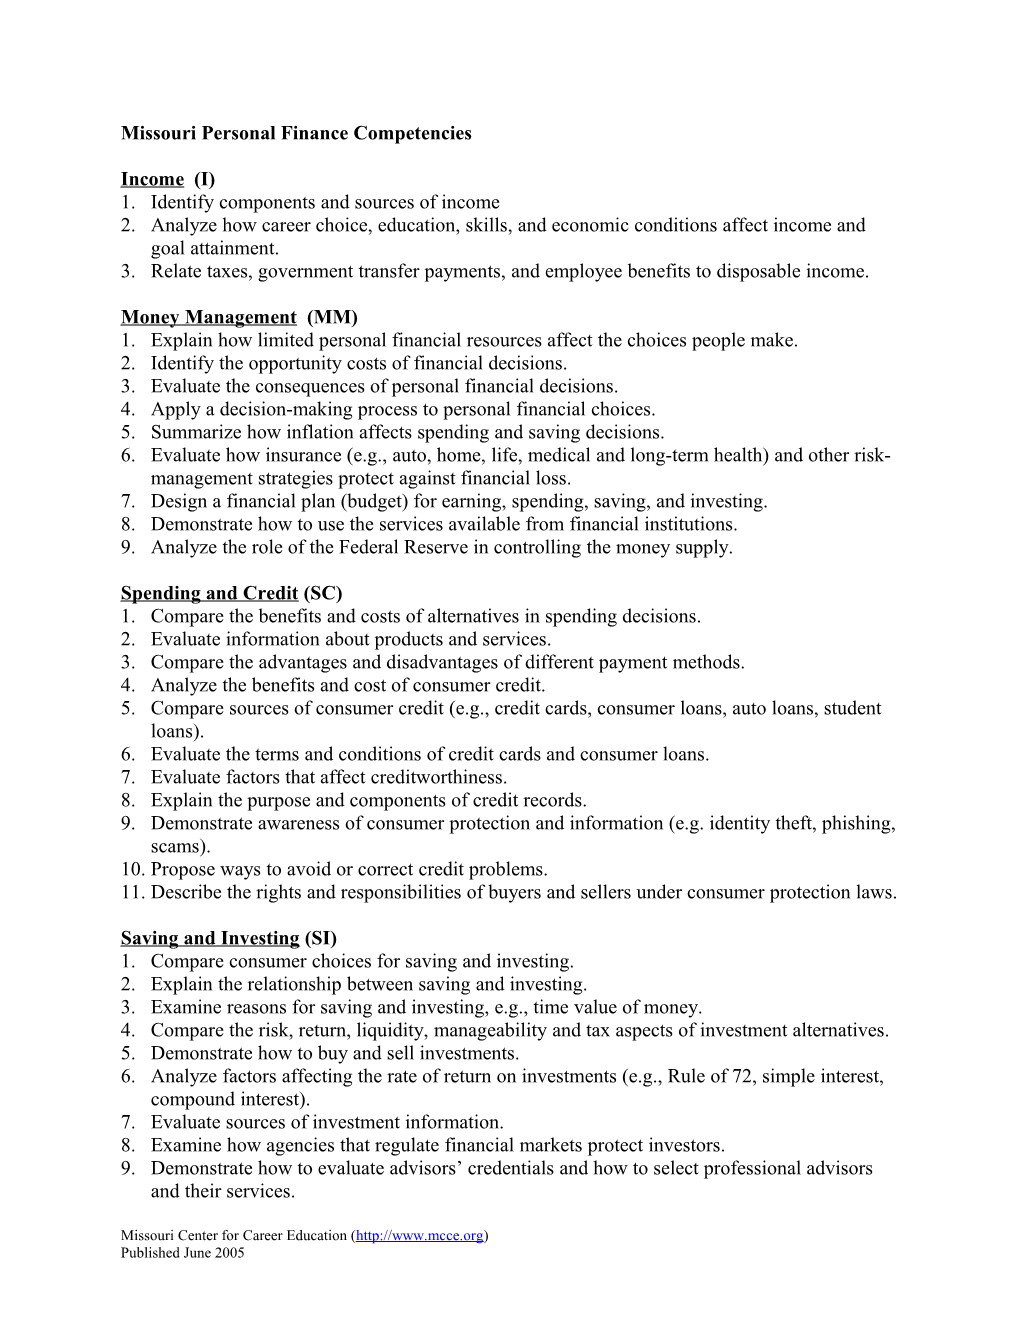 Missouri Personal Finance Competencies/Graduate Goals for All Learners